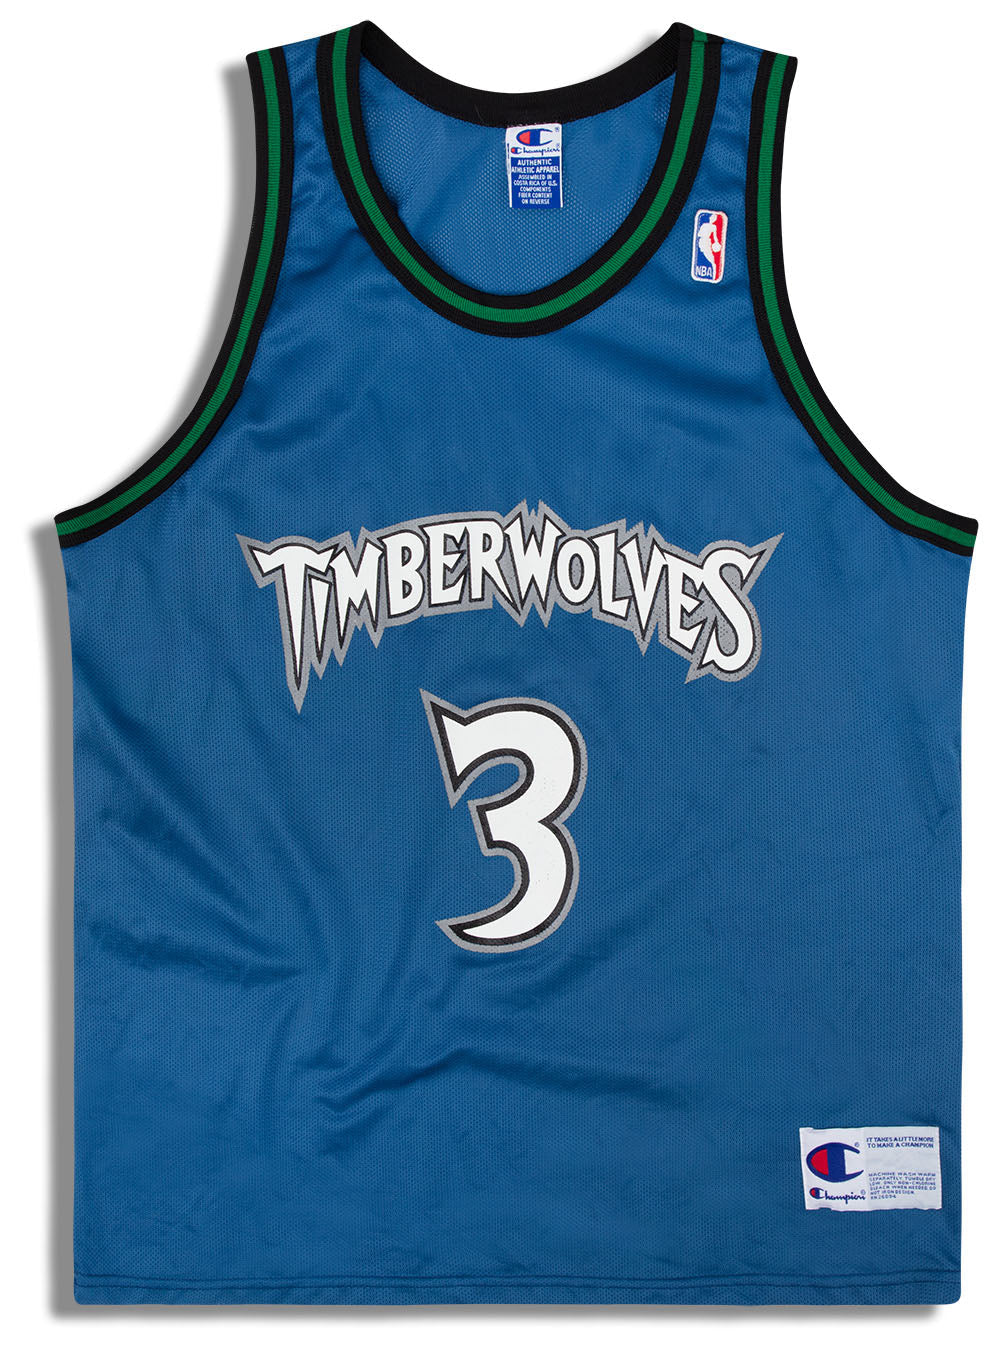 Vintage Stephon Marbury Minnesota Timberwolves Reversible Jersey NWT 90's  NBA basketball – For All To Envy